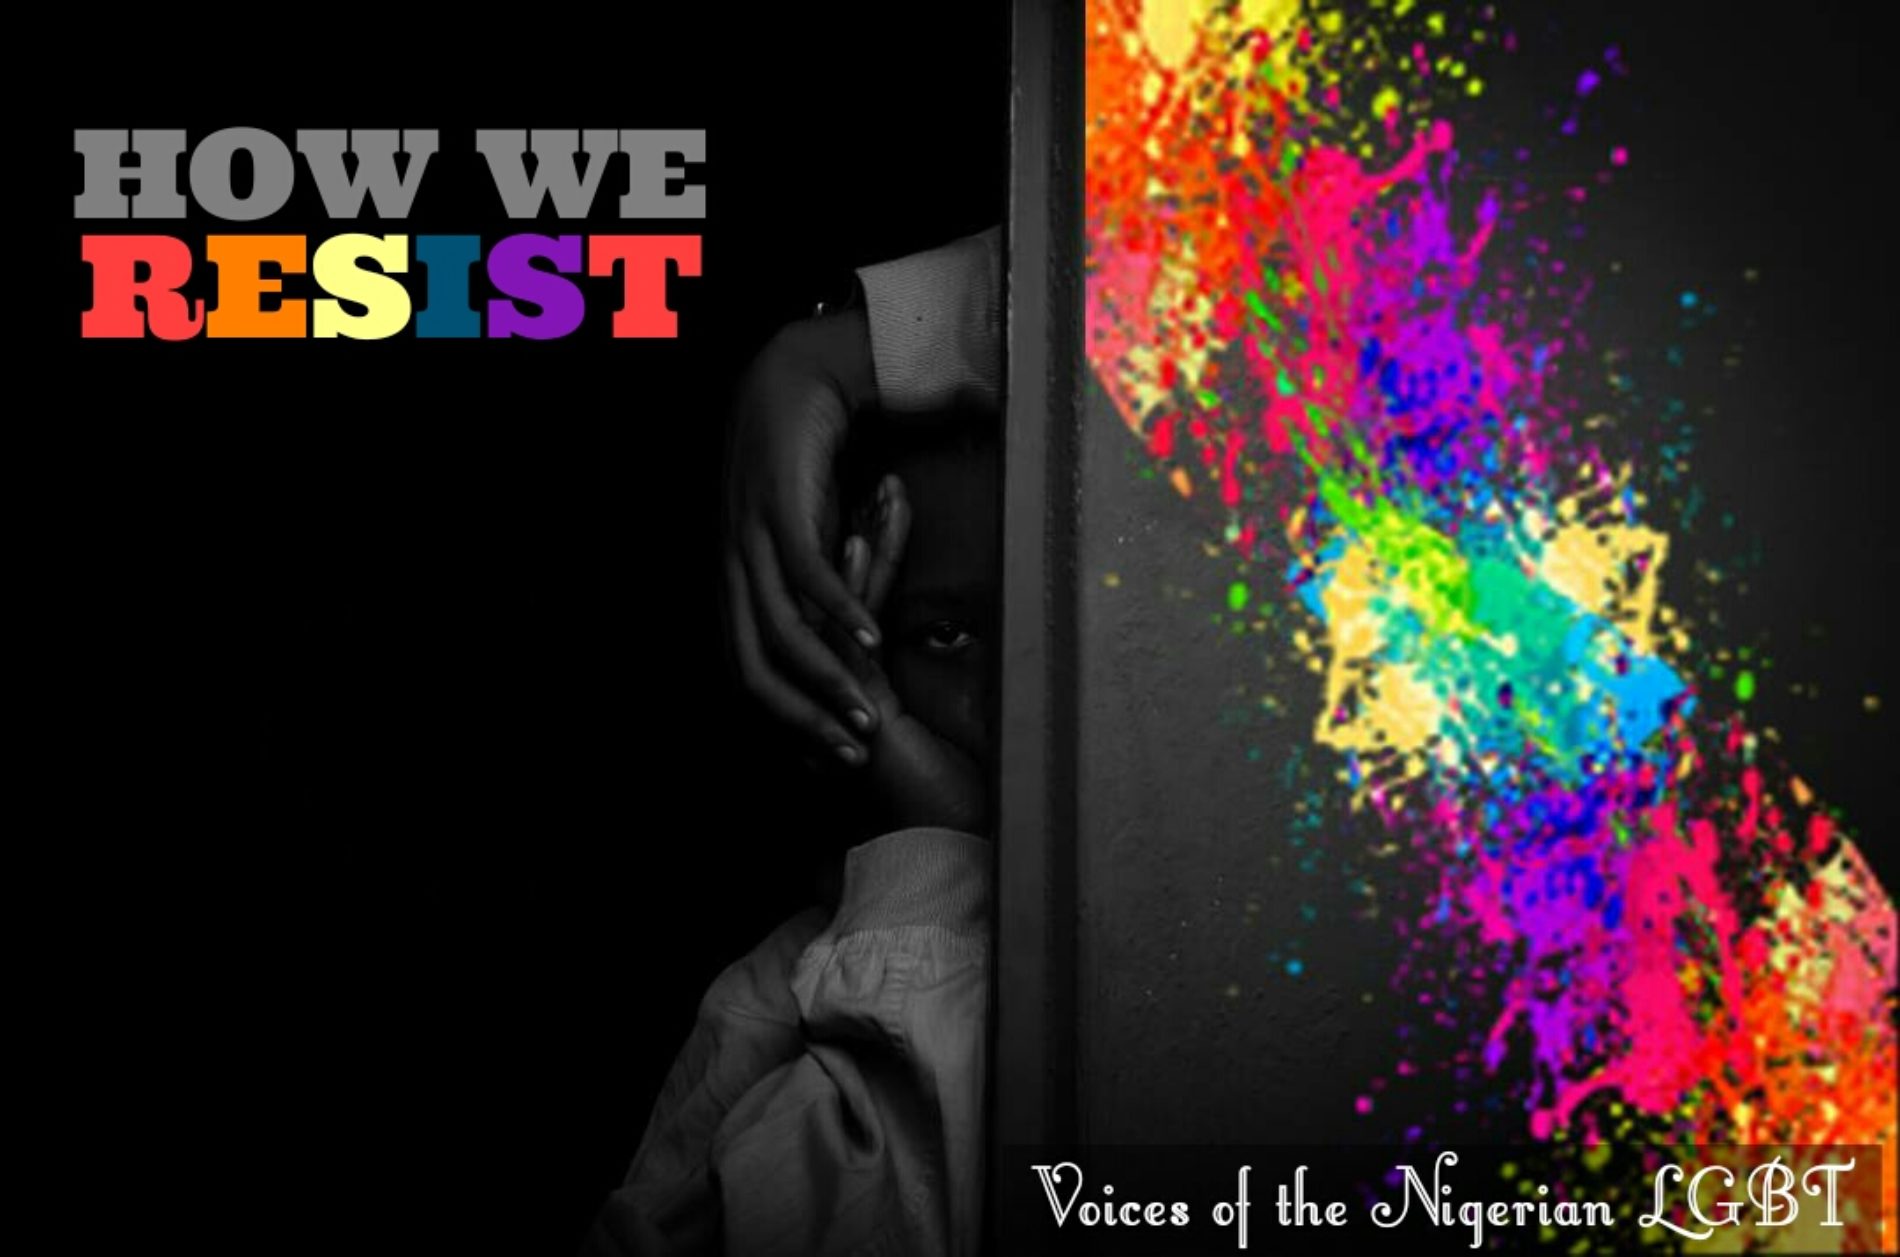 #HowIResist: A Campaign Dedicated to the Voices and Visibility of the Nigerian LGBT